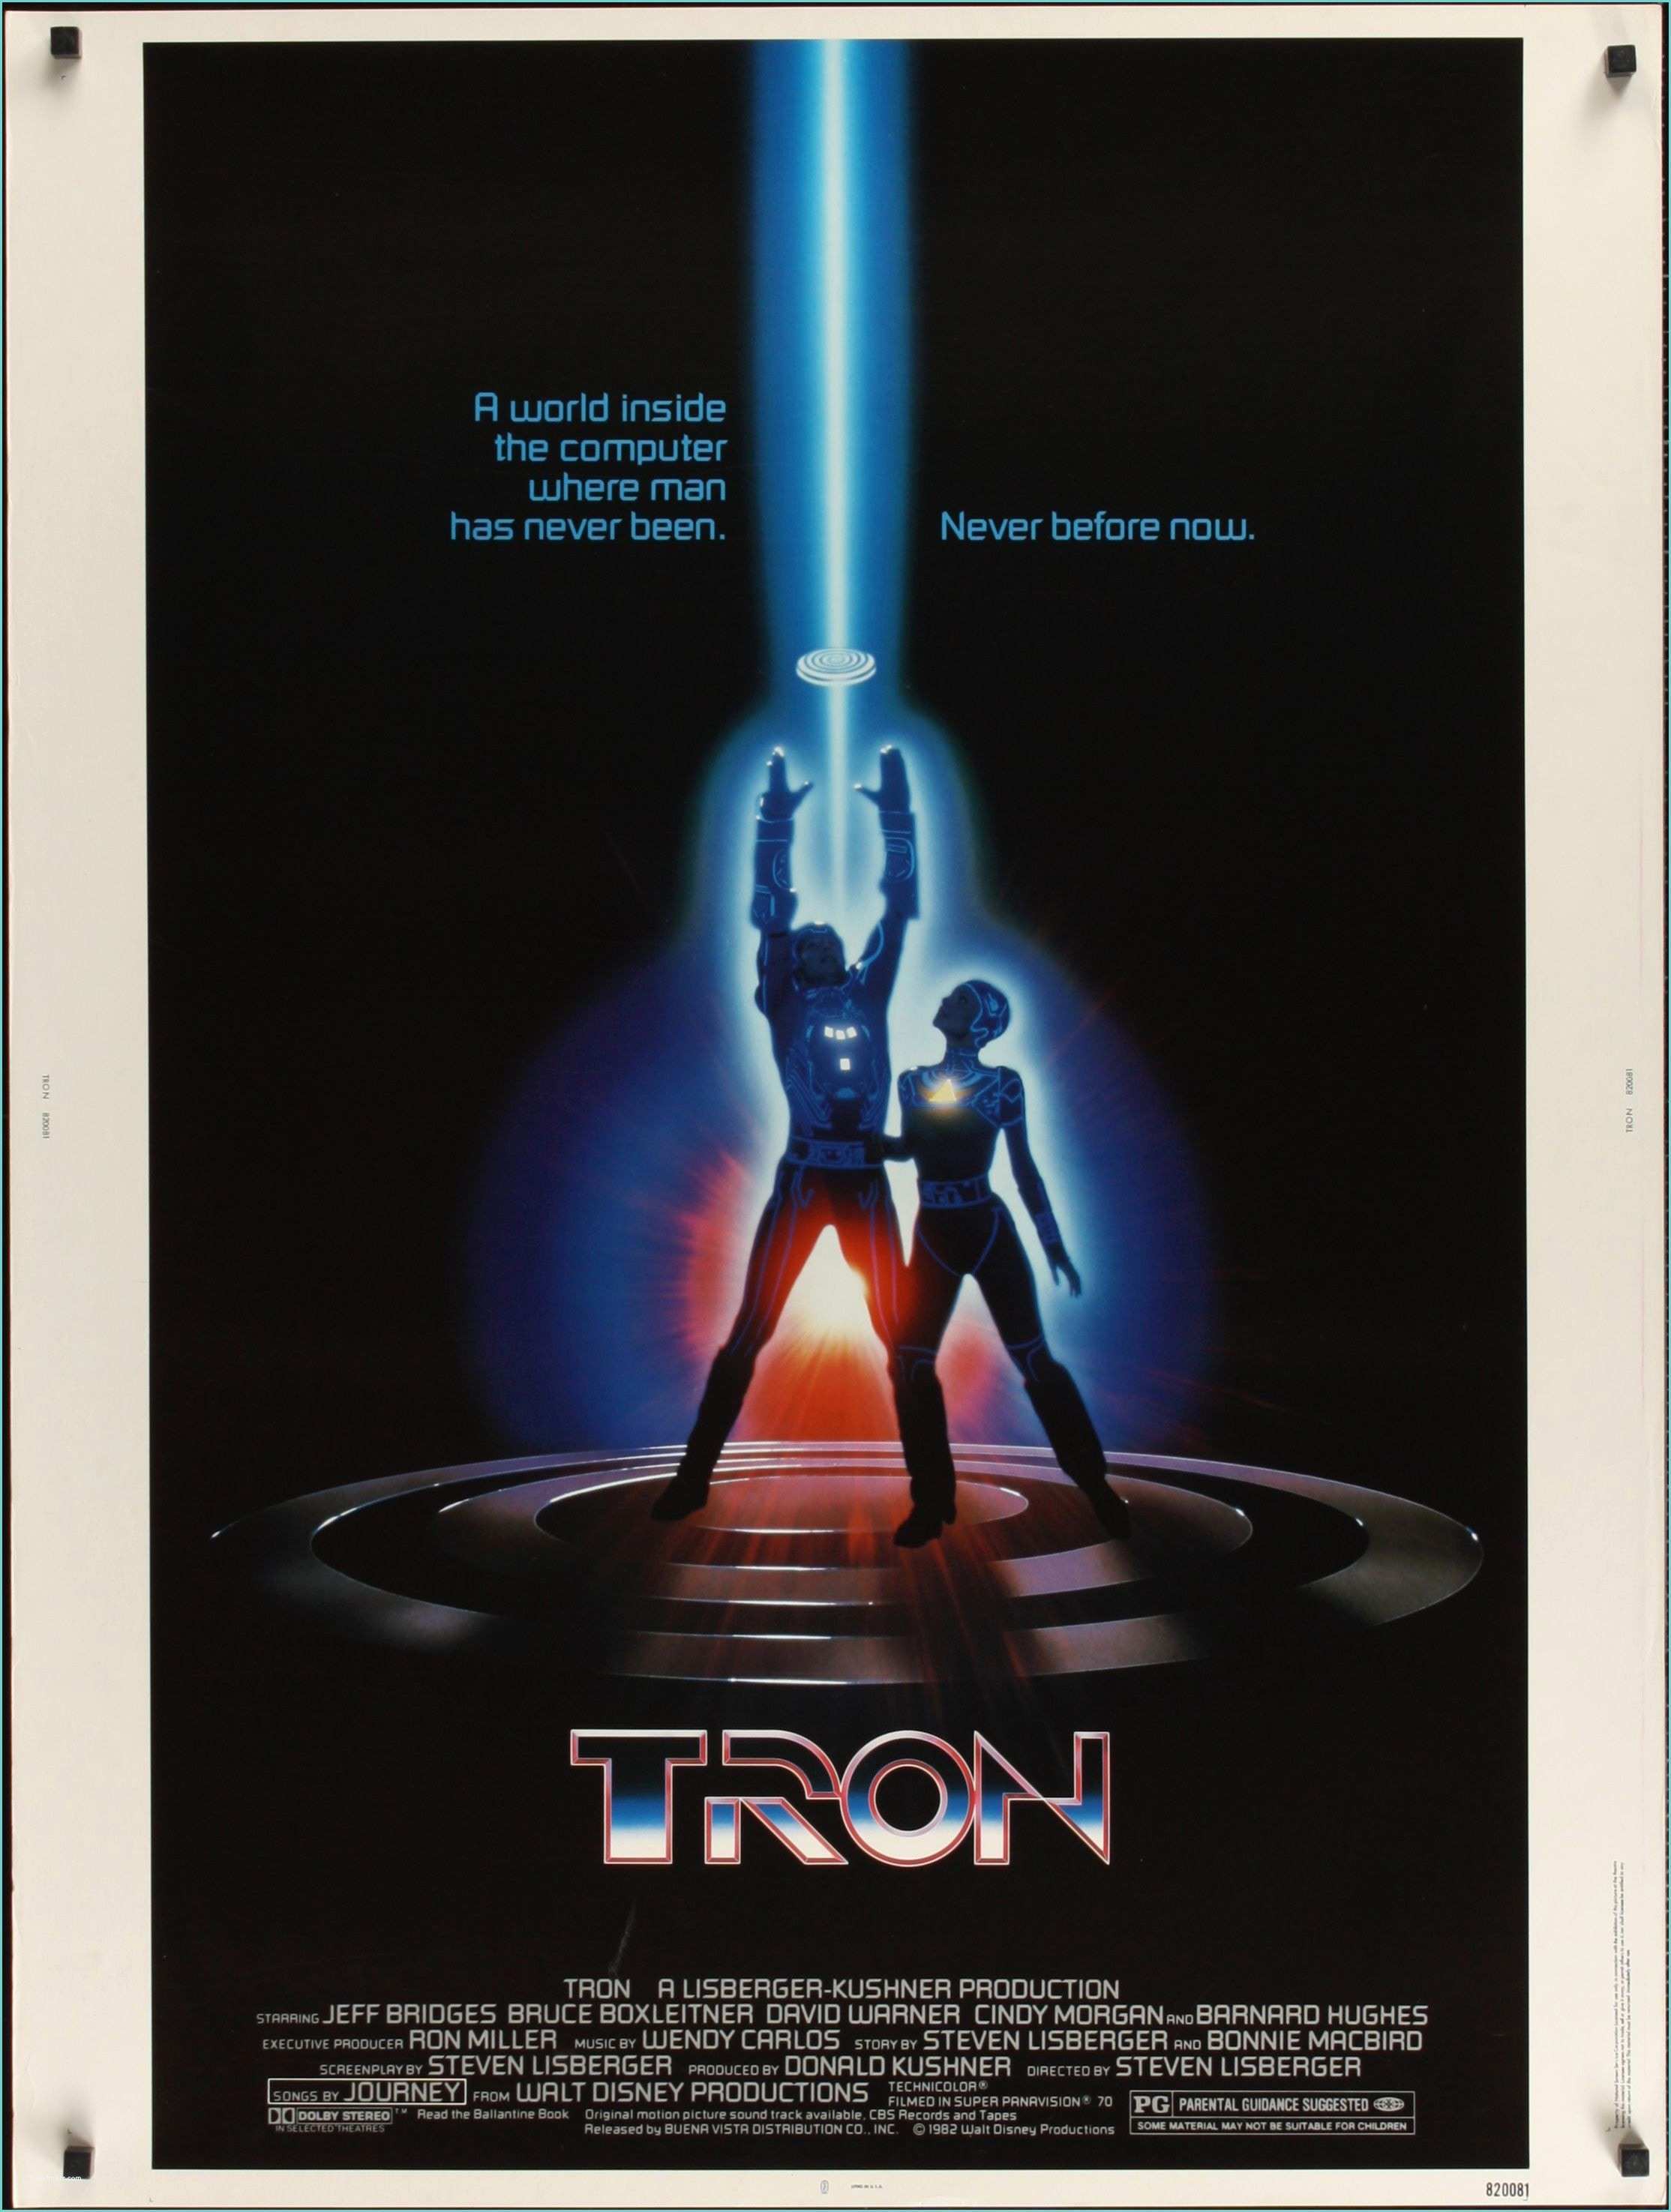 Allposters Return Policy Tron Movie Poster Viewing Gallery Movie Poster